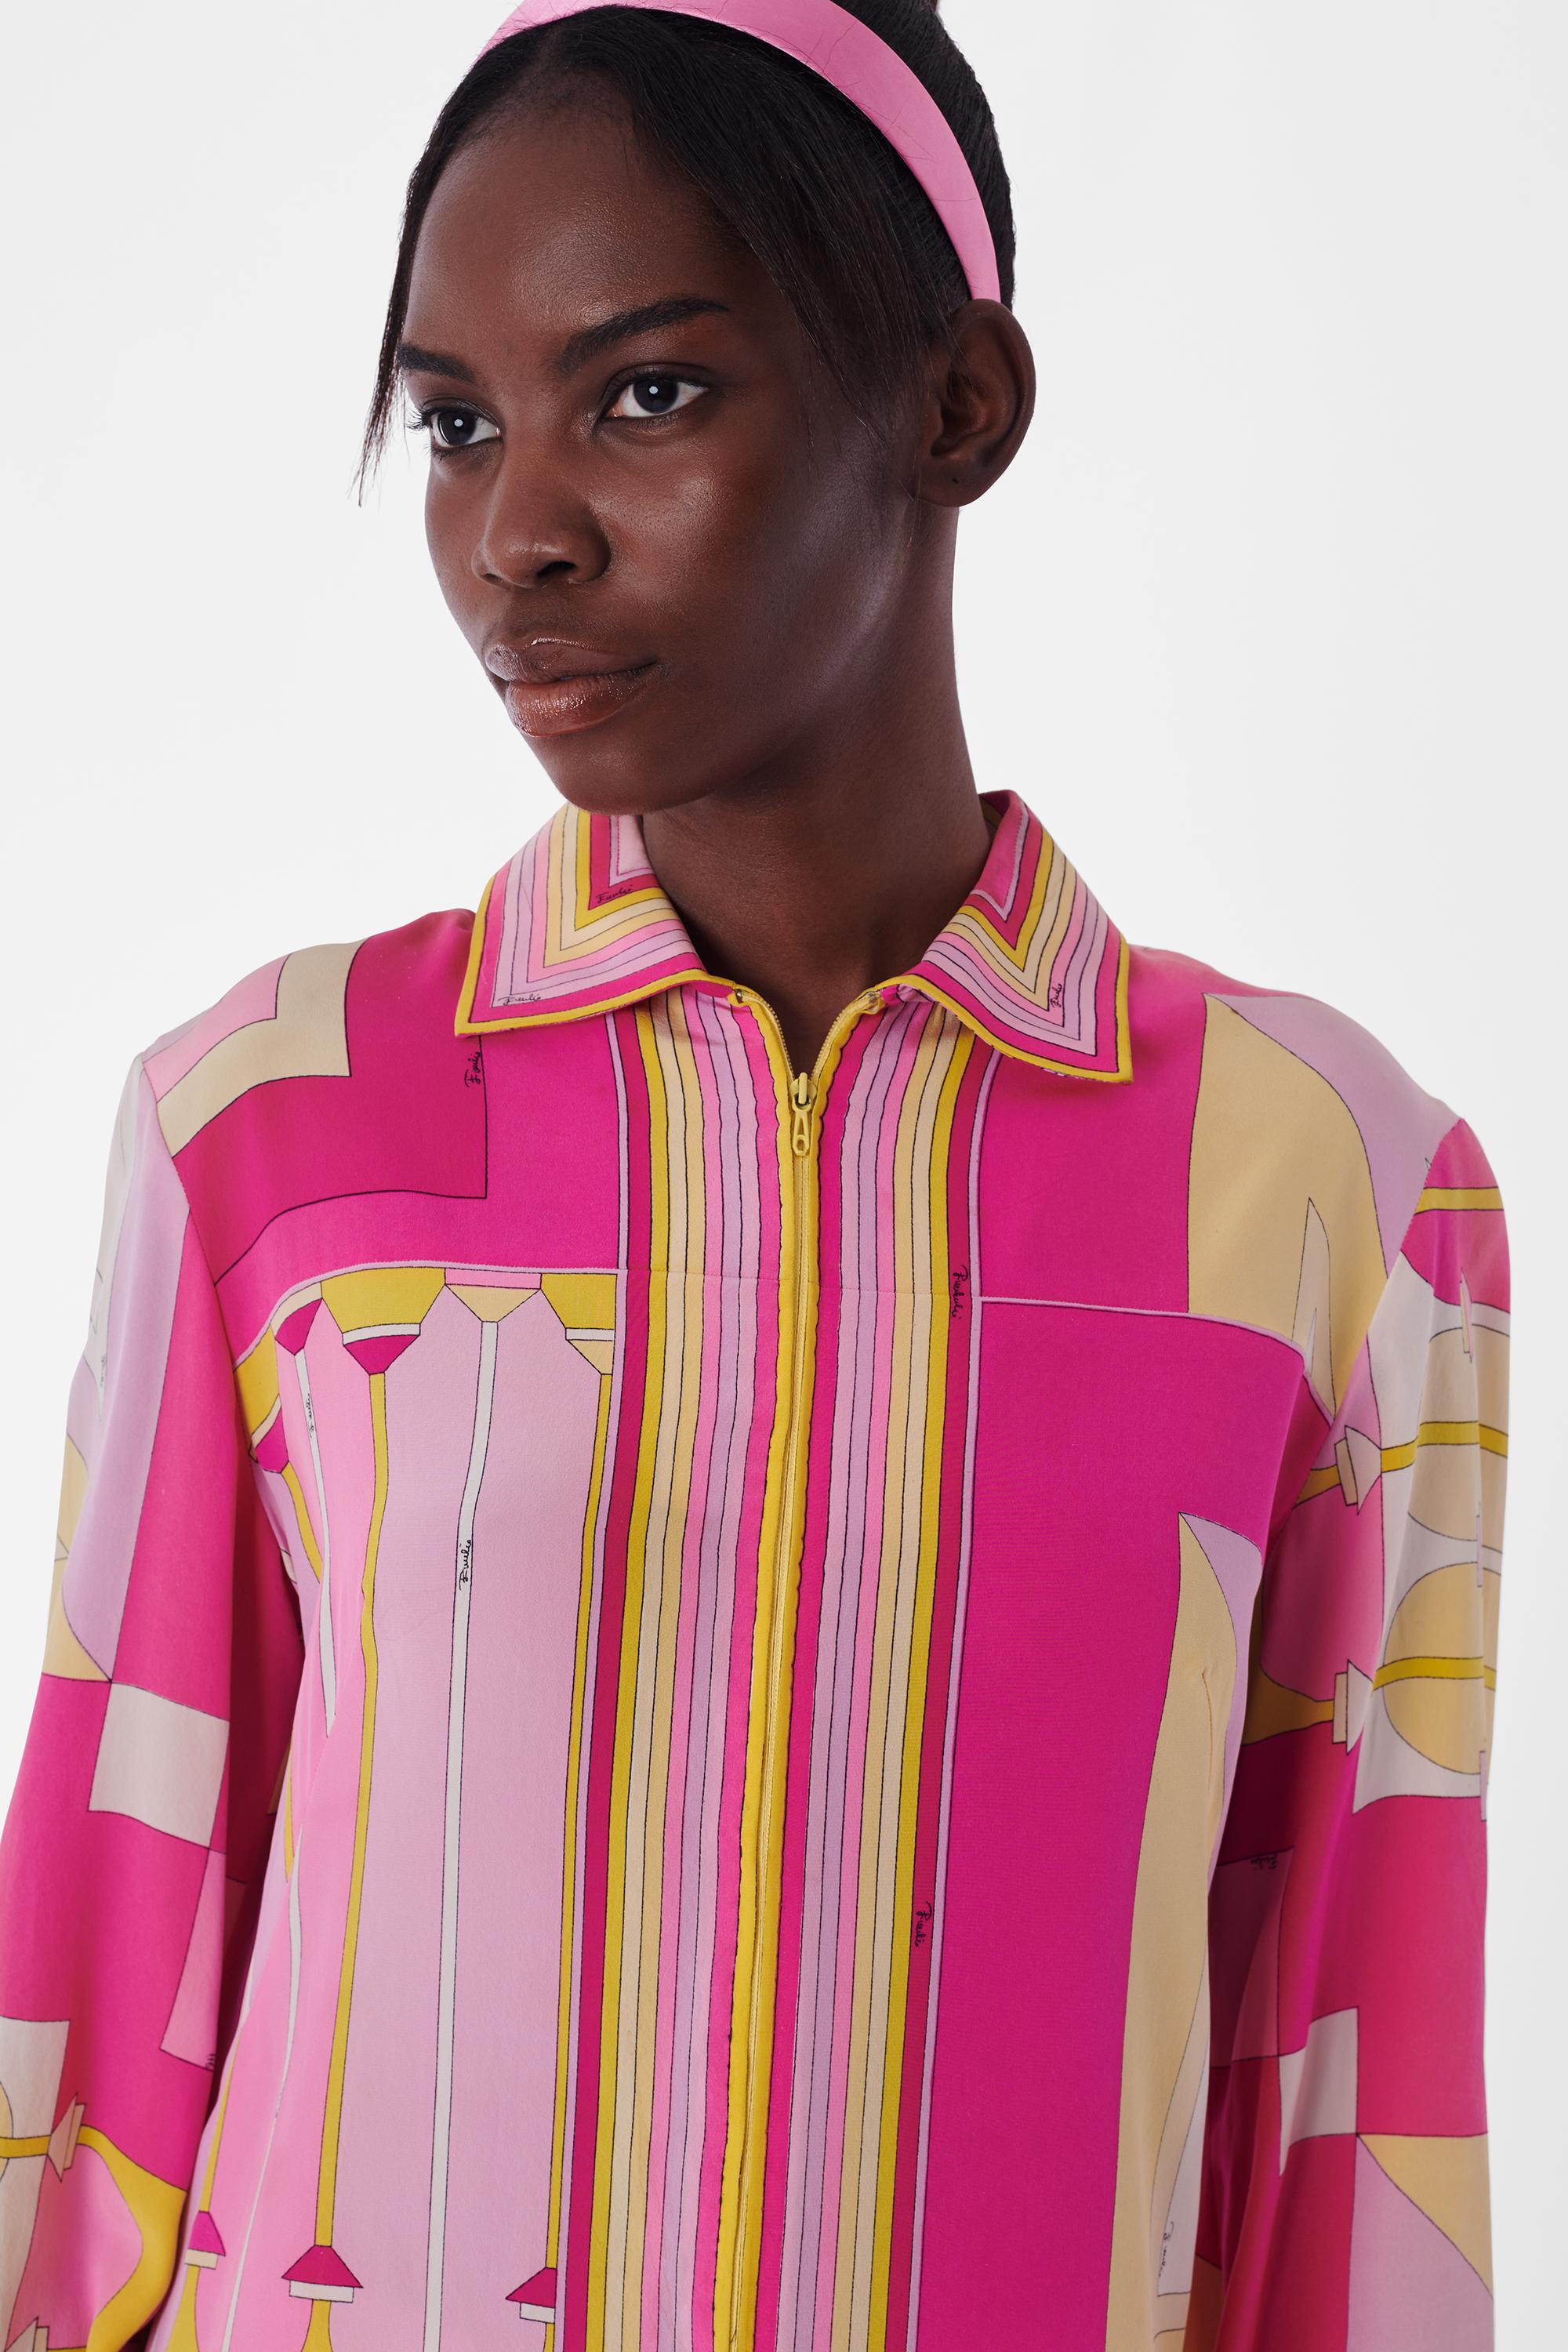 Emilio Pucci Vintage 1960's Pink Silk Zip Up Dress. Features pink and yellow print, long sleeves, collar, concealed front zipper and knee length. In excellent vintage condition.

Label size: UK 12
Modern size: UK: 10, US: 4 to 6, EU: 38
Measurements